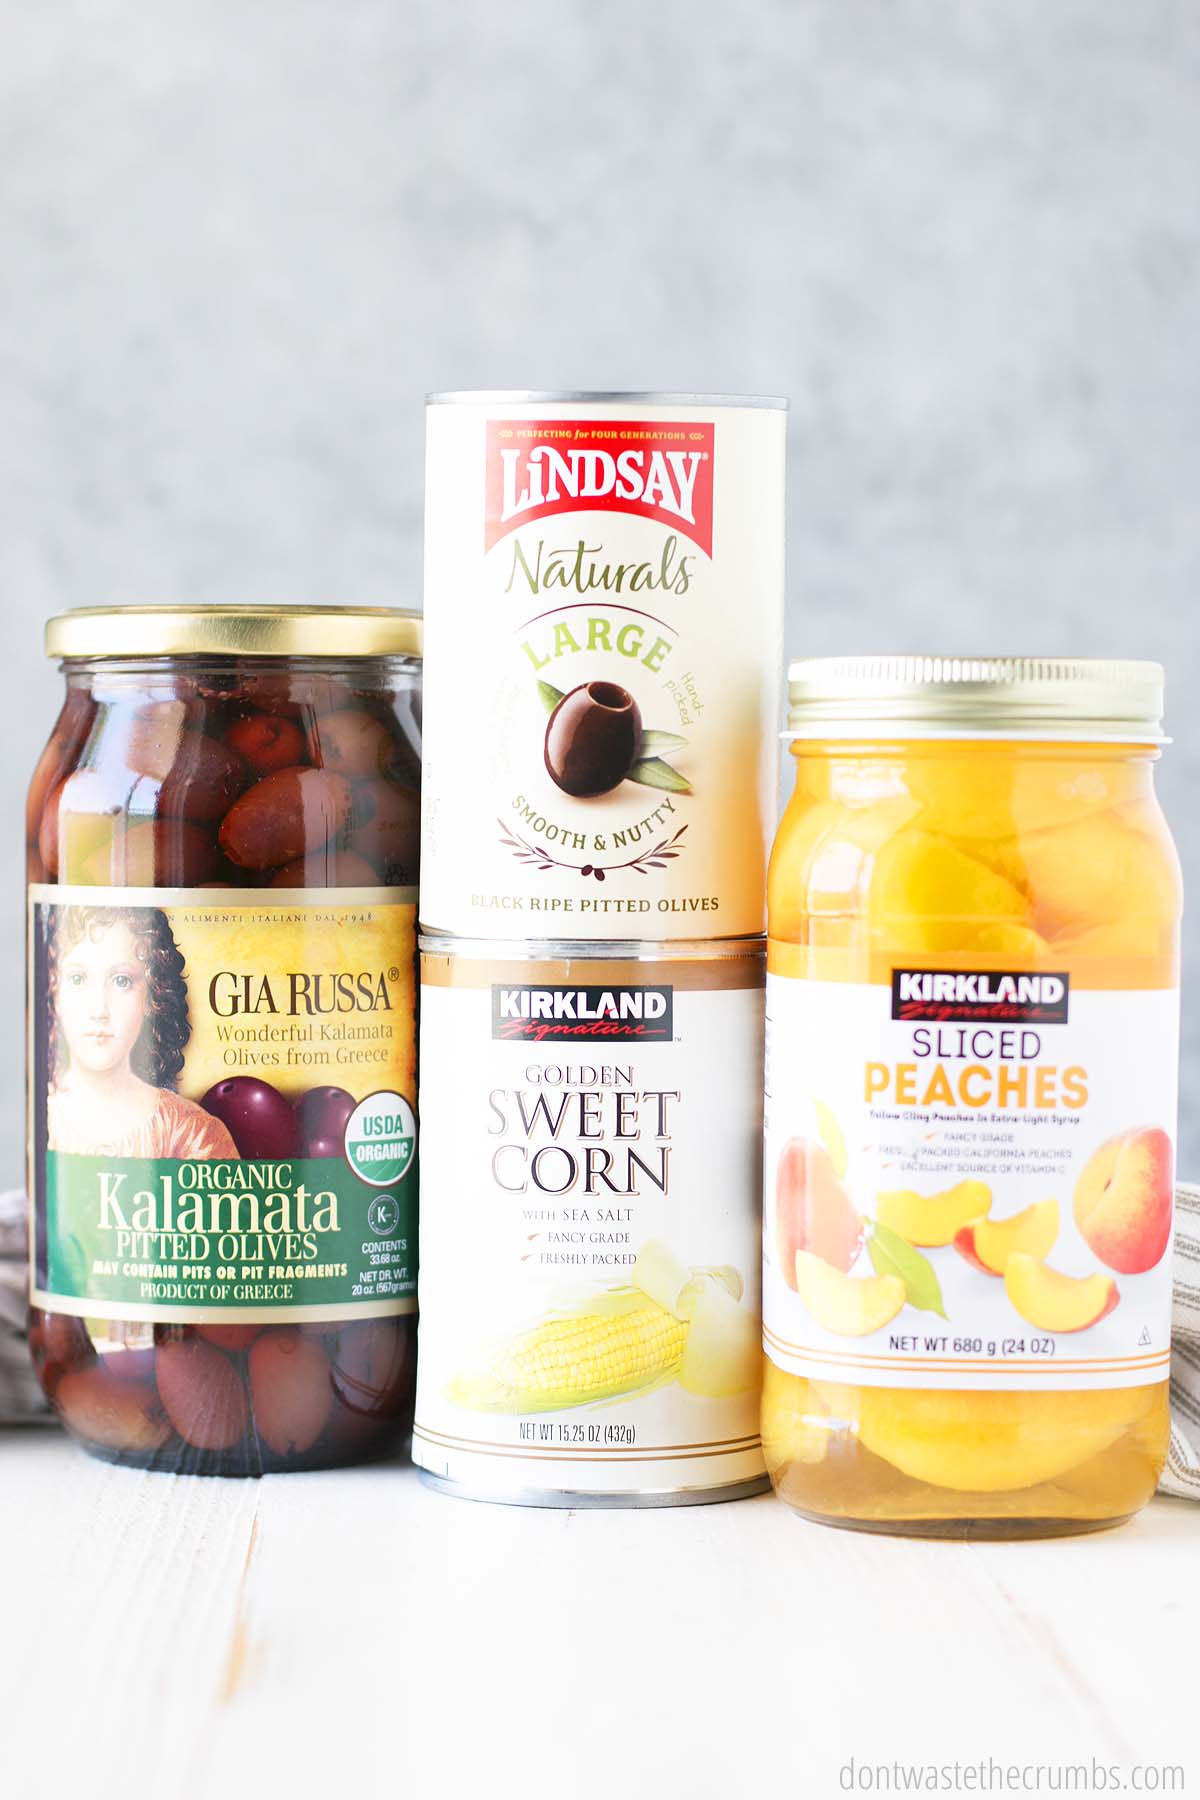 Pantry goods you can buy at Costco, including kalamata olives, canned olives, canned sweet corn, and a jar of peaches